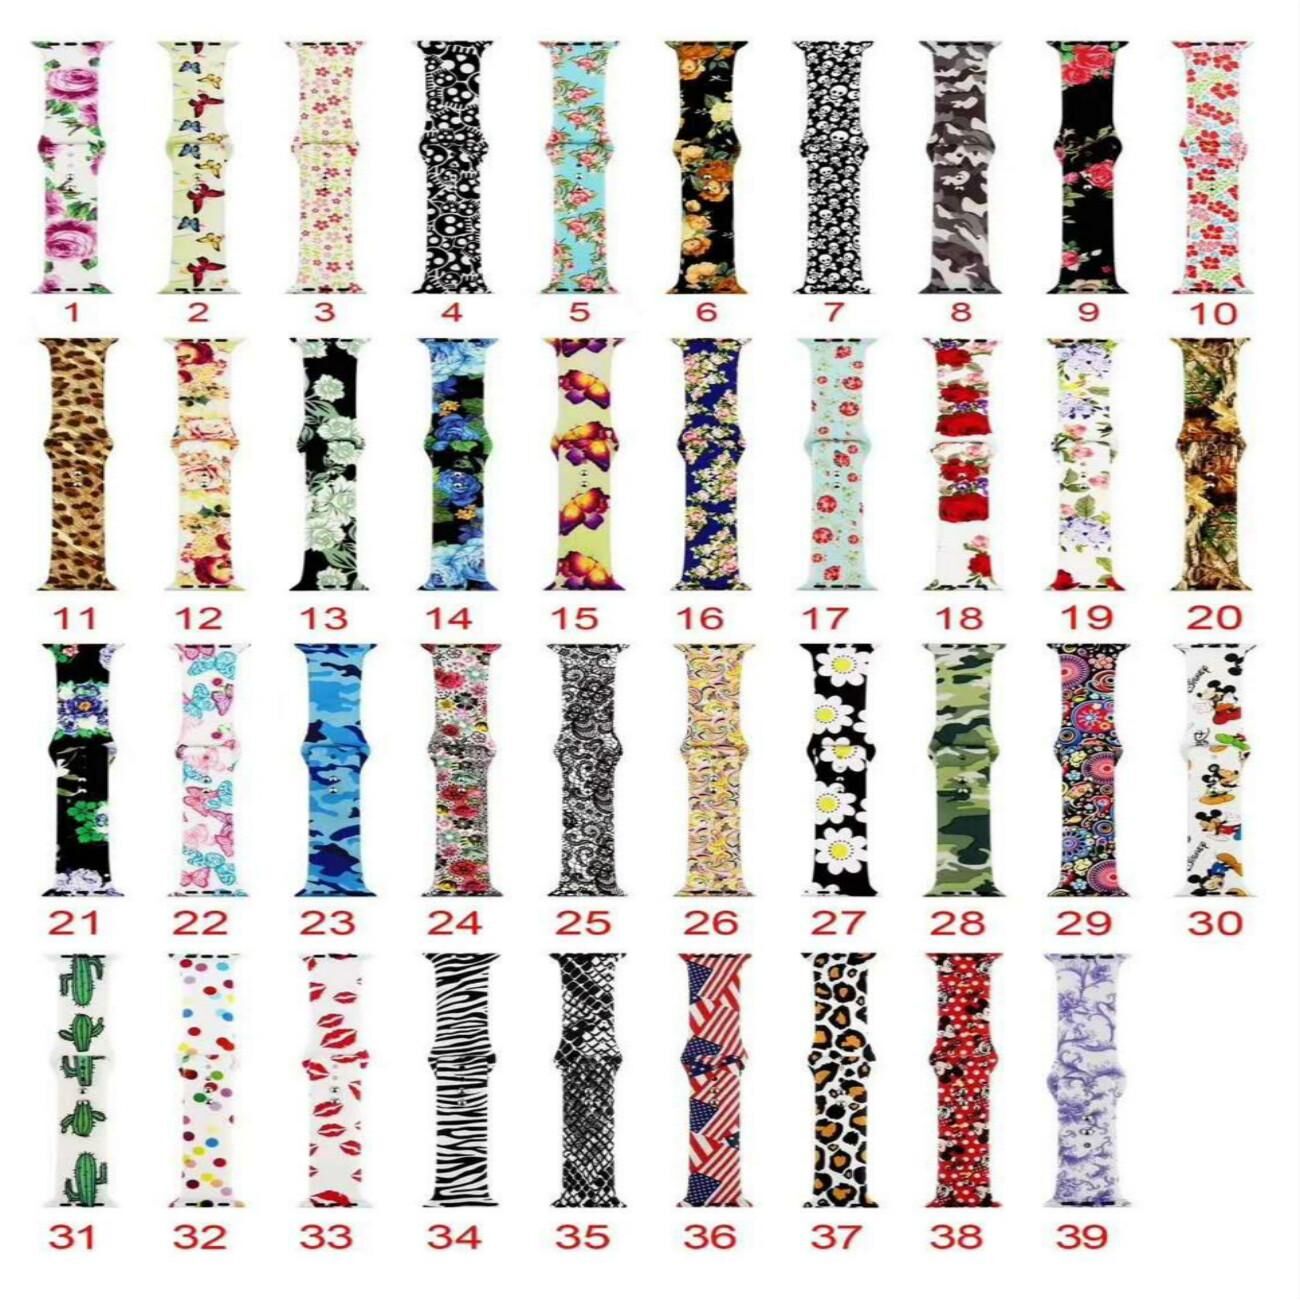 Watch peripherals Printed Silicone Strap Band for Apple Watch 38mm 40mm 42mm 44mm Leopard print Printed Bands for iWatch Series 5/4/3/2 Band Strap